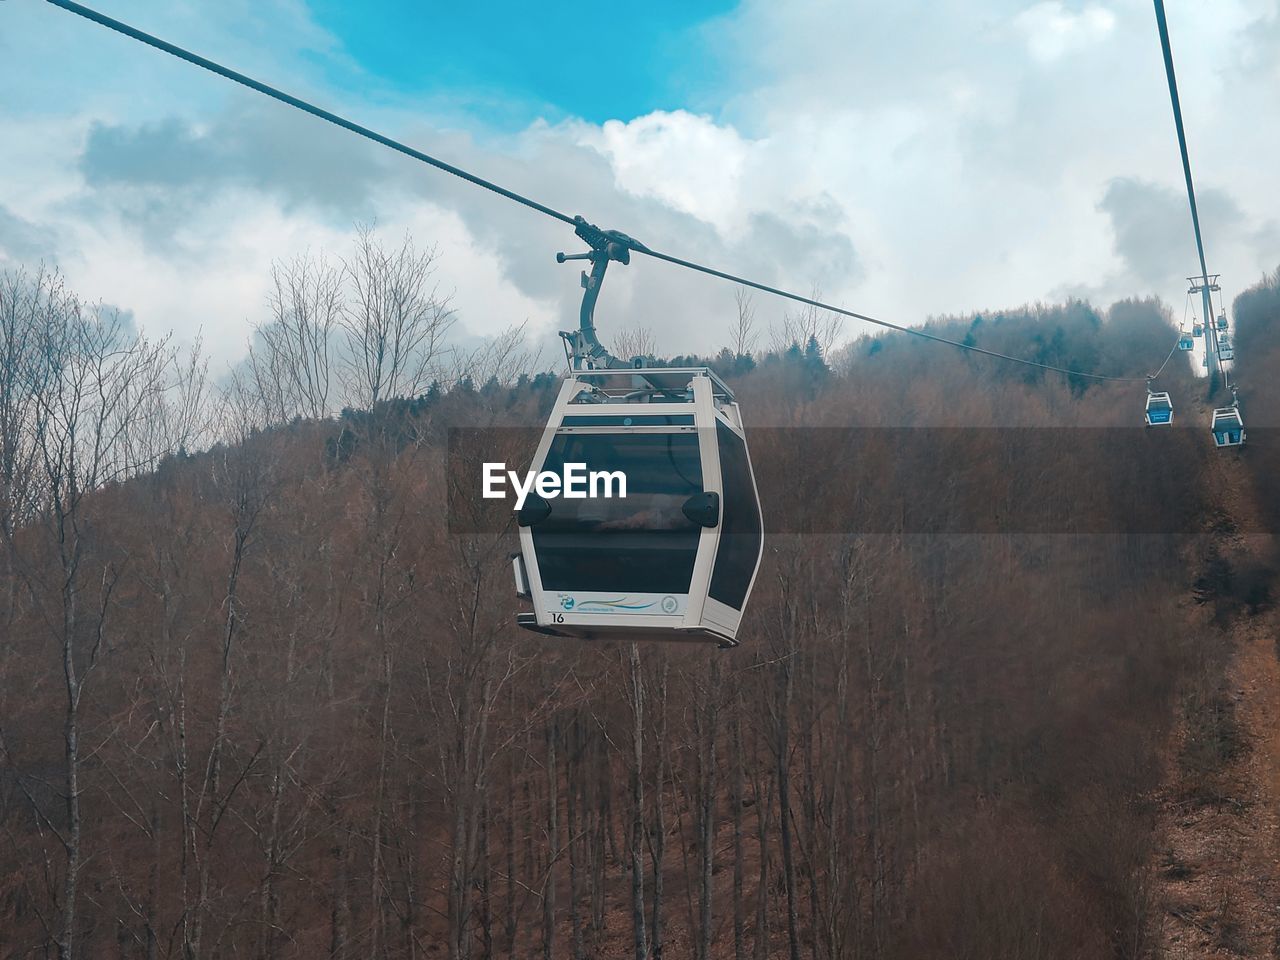 cable car, transportation, mode of transportation, cloud, sky, nature, overhead cable car, ski lift, travel, tree, mountain, cable, landscape, land, hanging, scenics - nature, no people, day, vehicle, plant, environment, outdoors, forest, beauty in nature, winter, journey